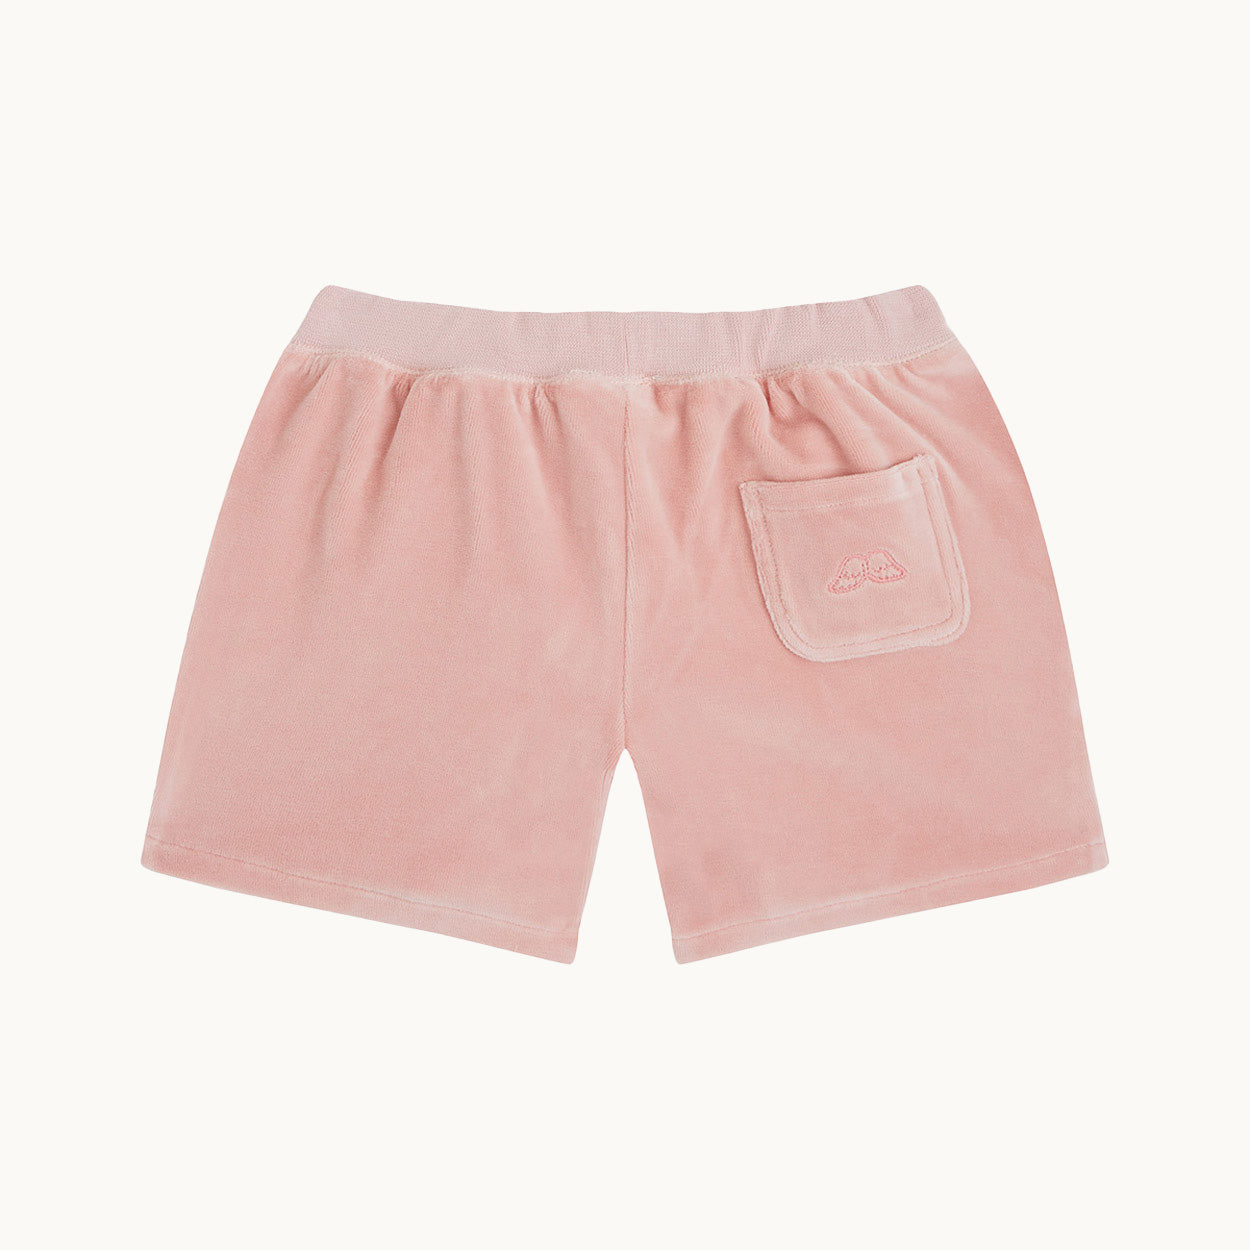 Velour Angel Wing Shorts - Child Pink